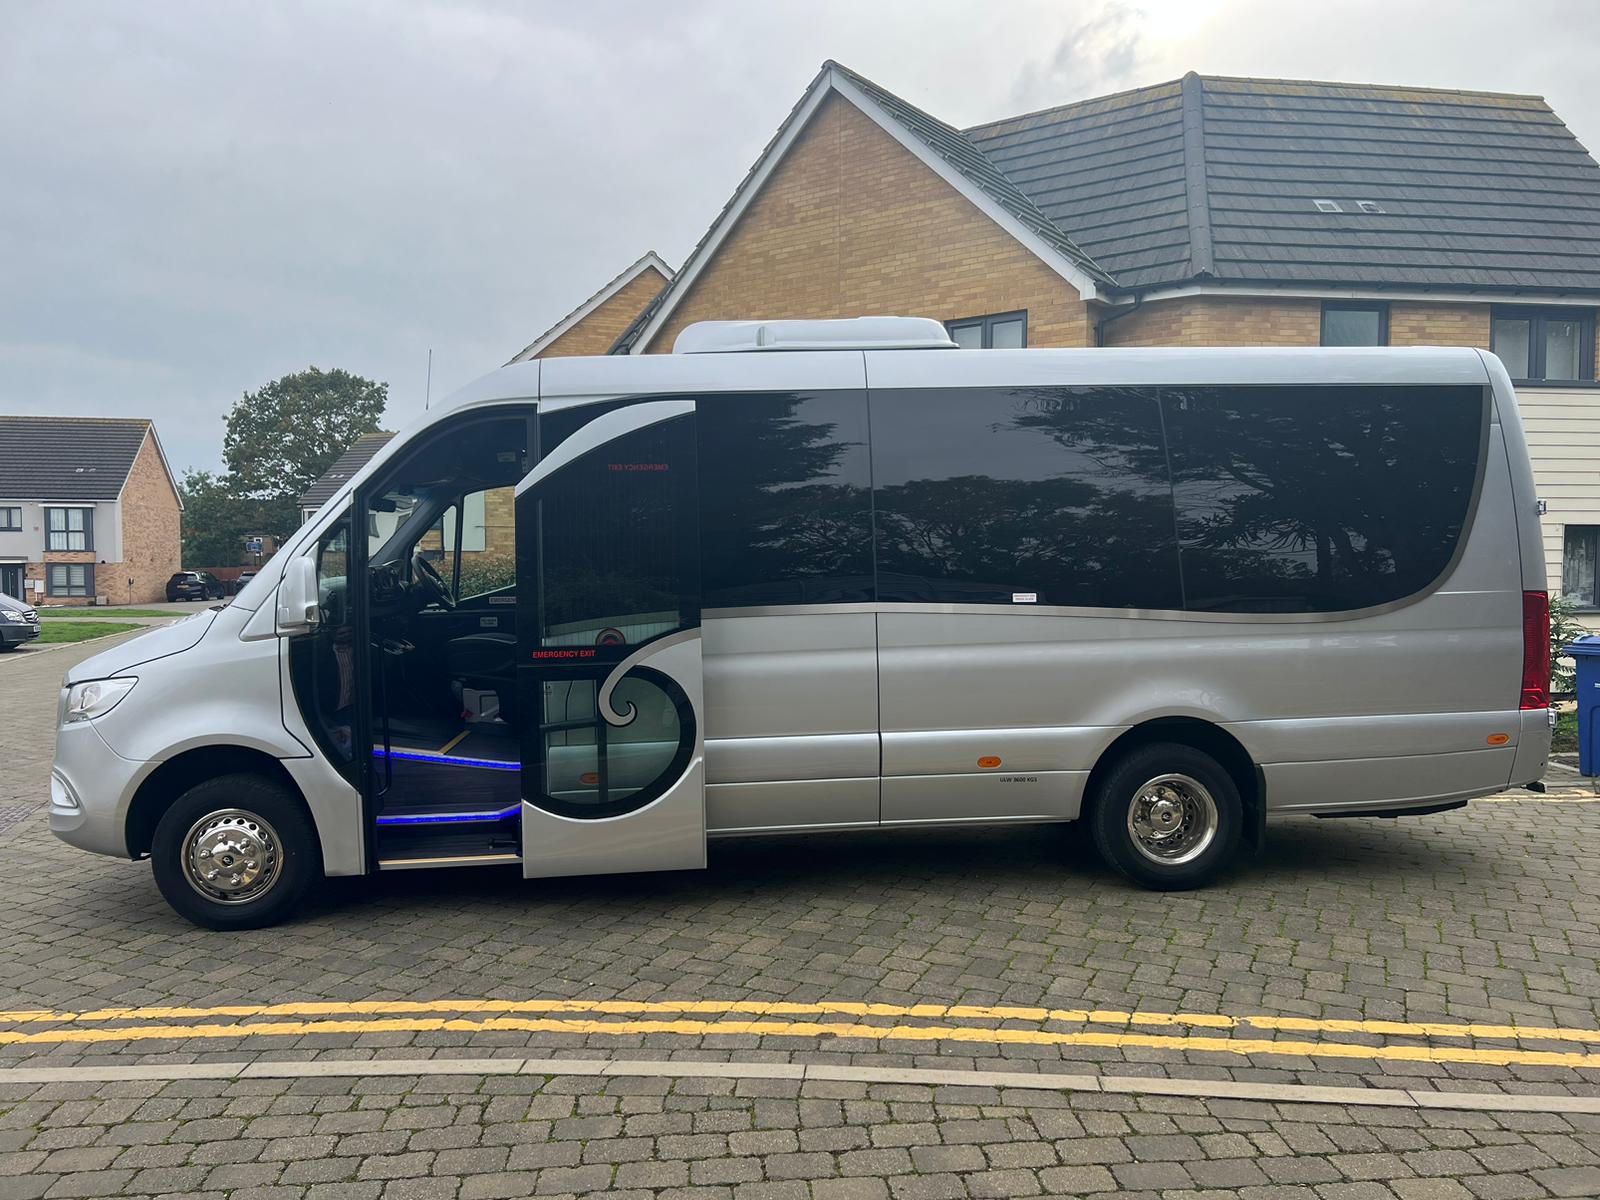 The Ultimate Guide to Budget-Friendly Minibus Rentals in the UK